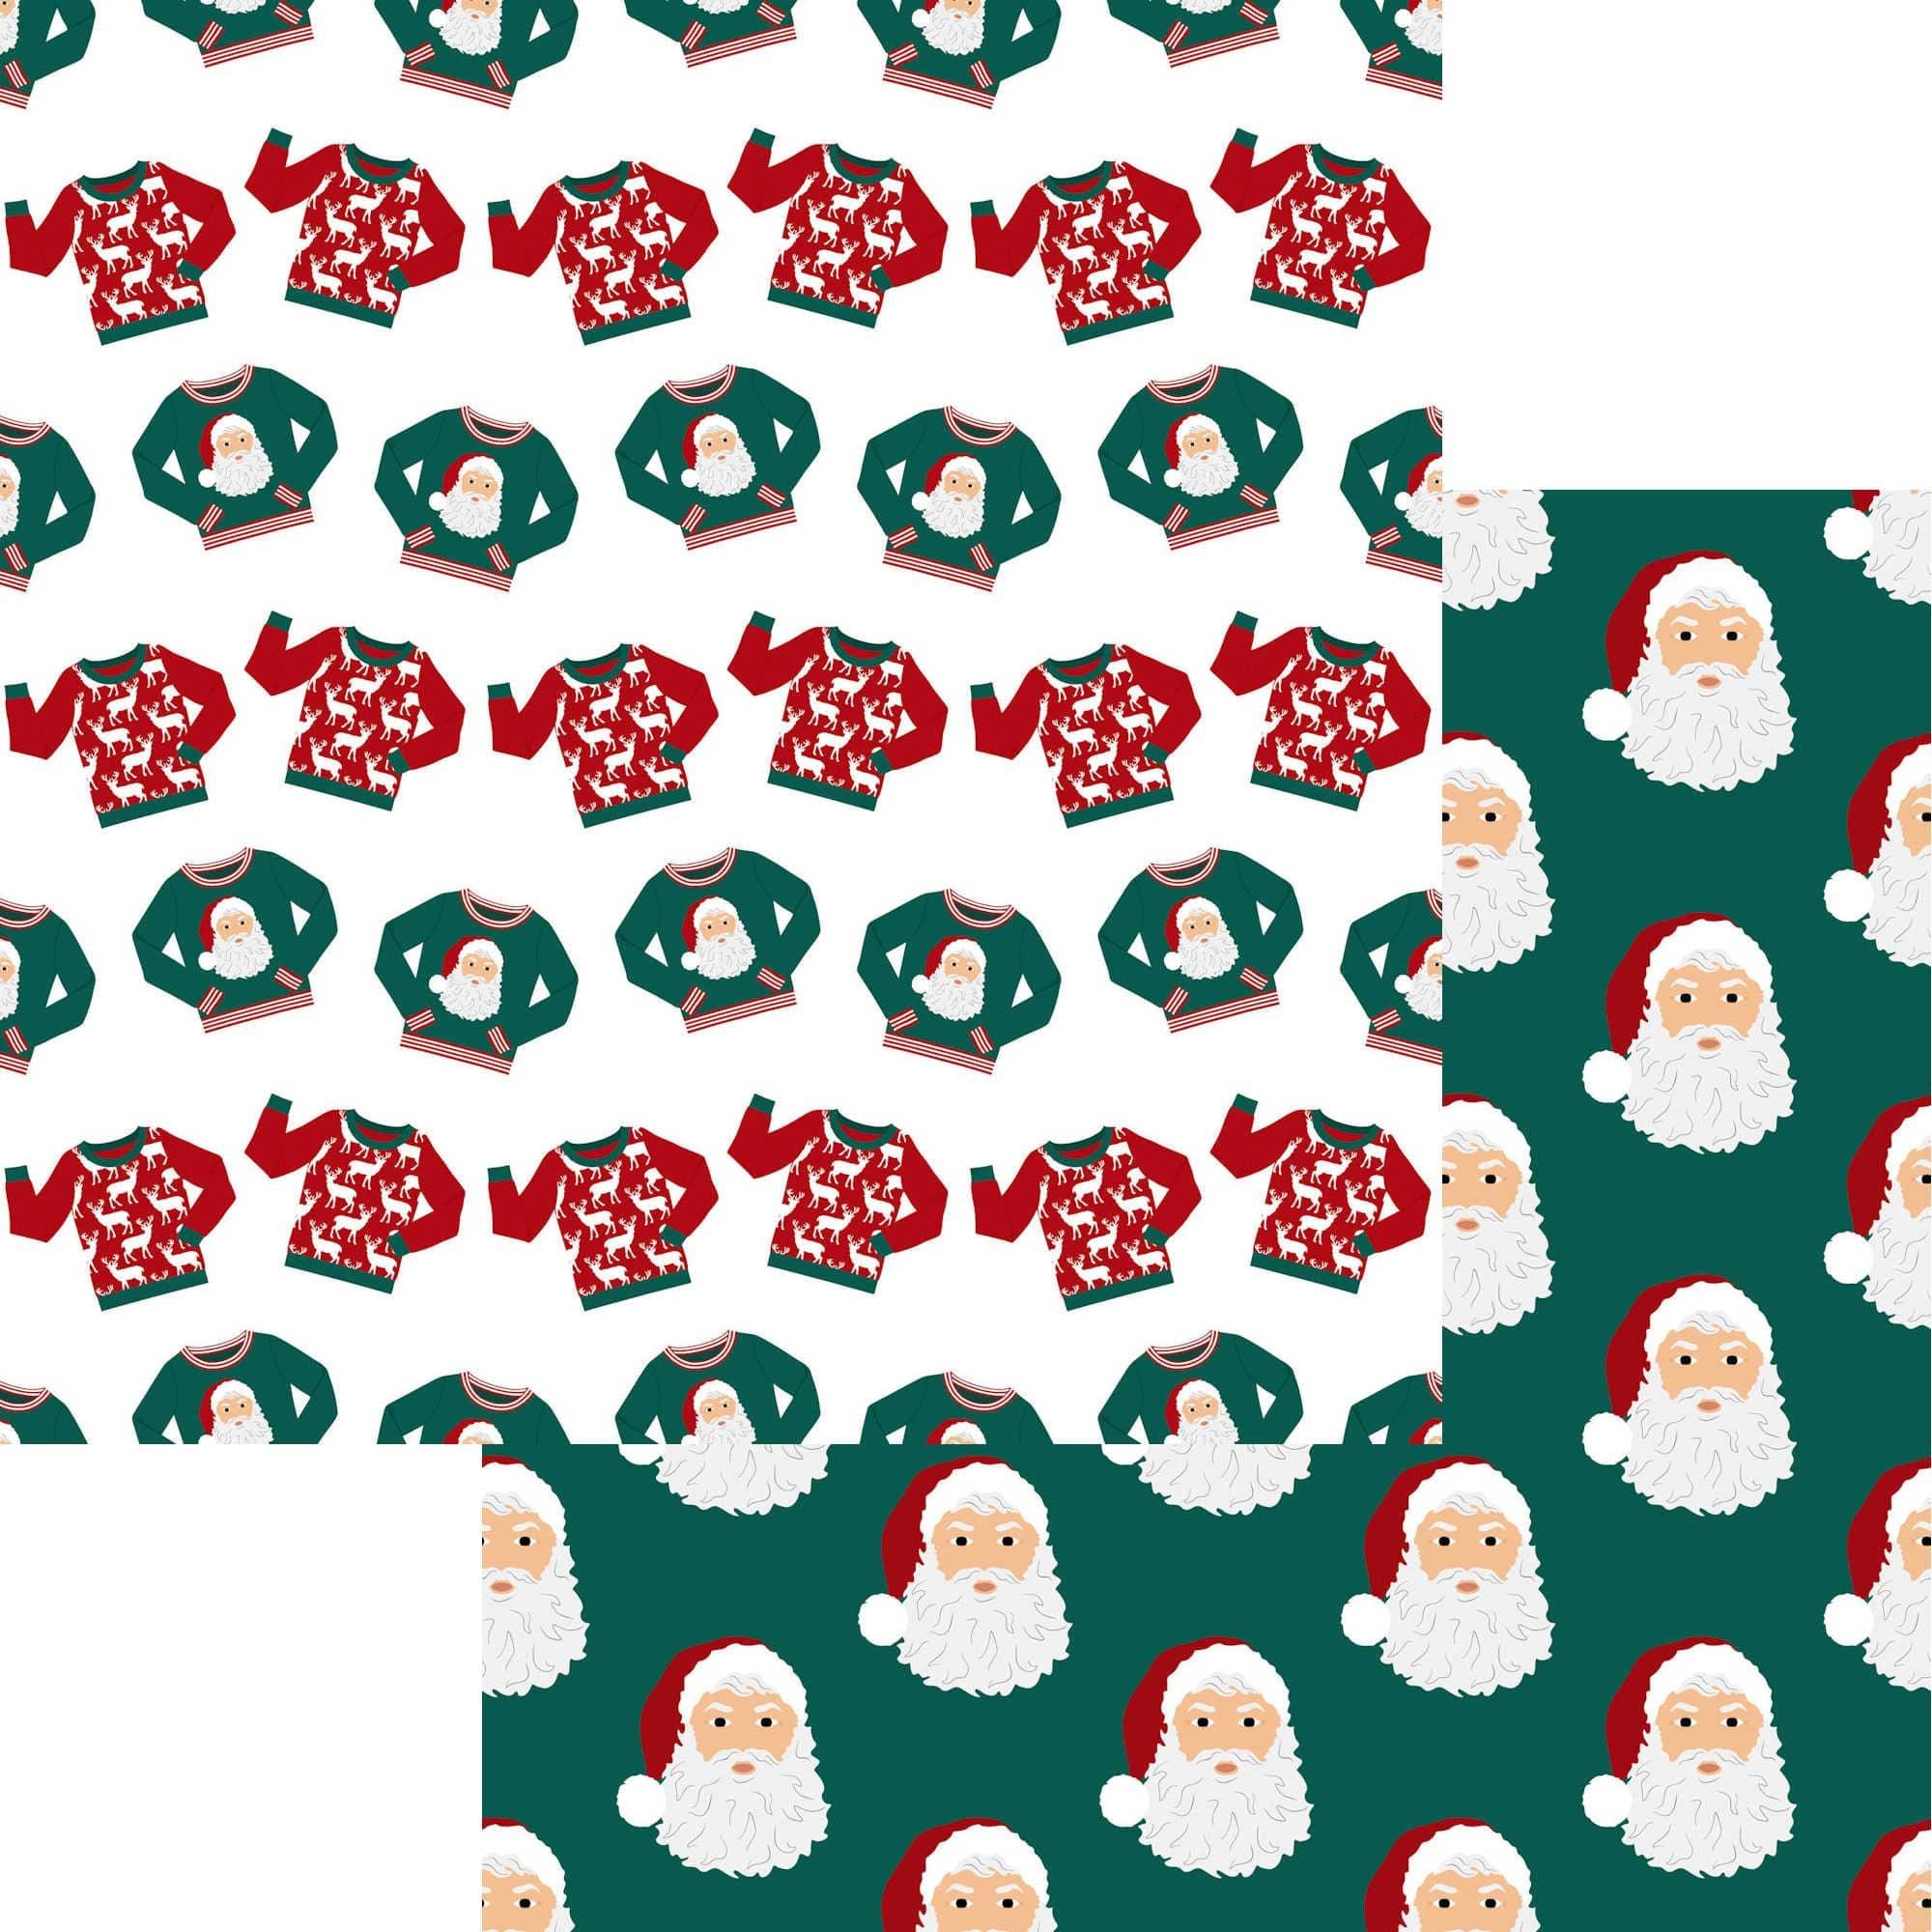  Ugly Sweater Print Tissue Paper - Christmas Tissue